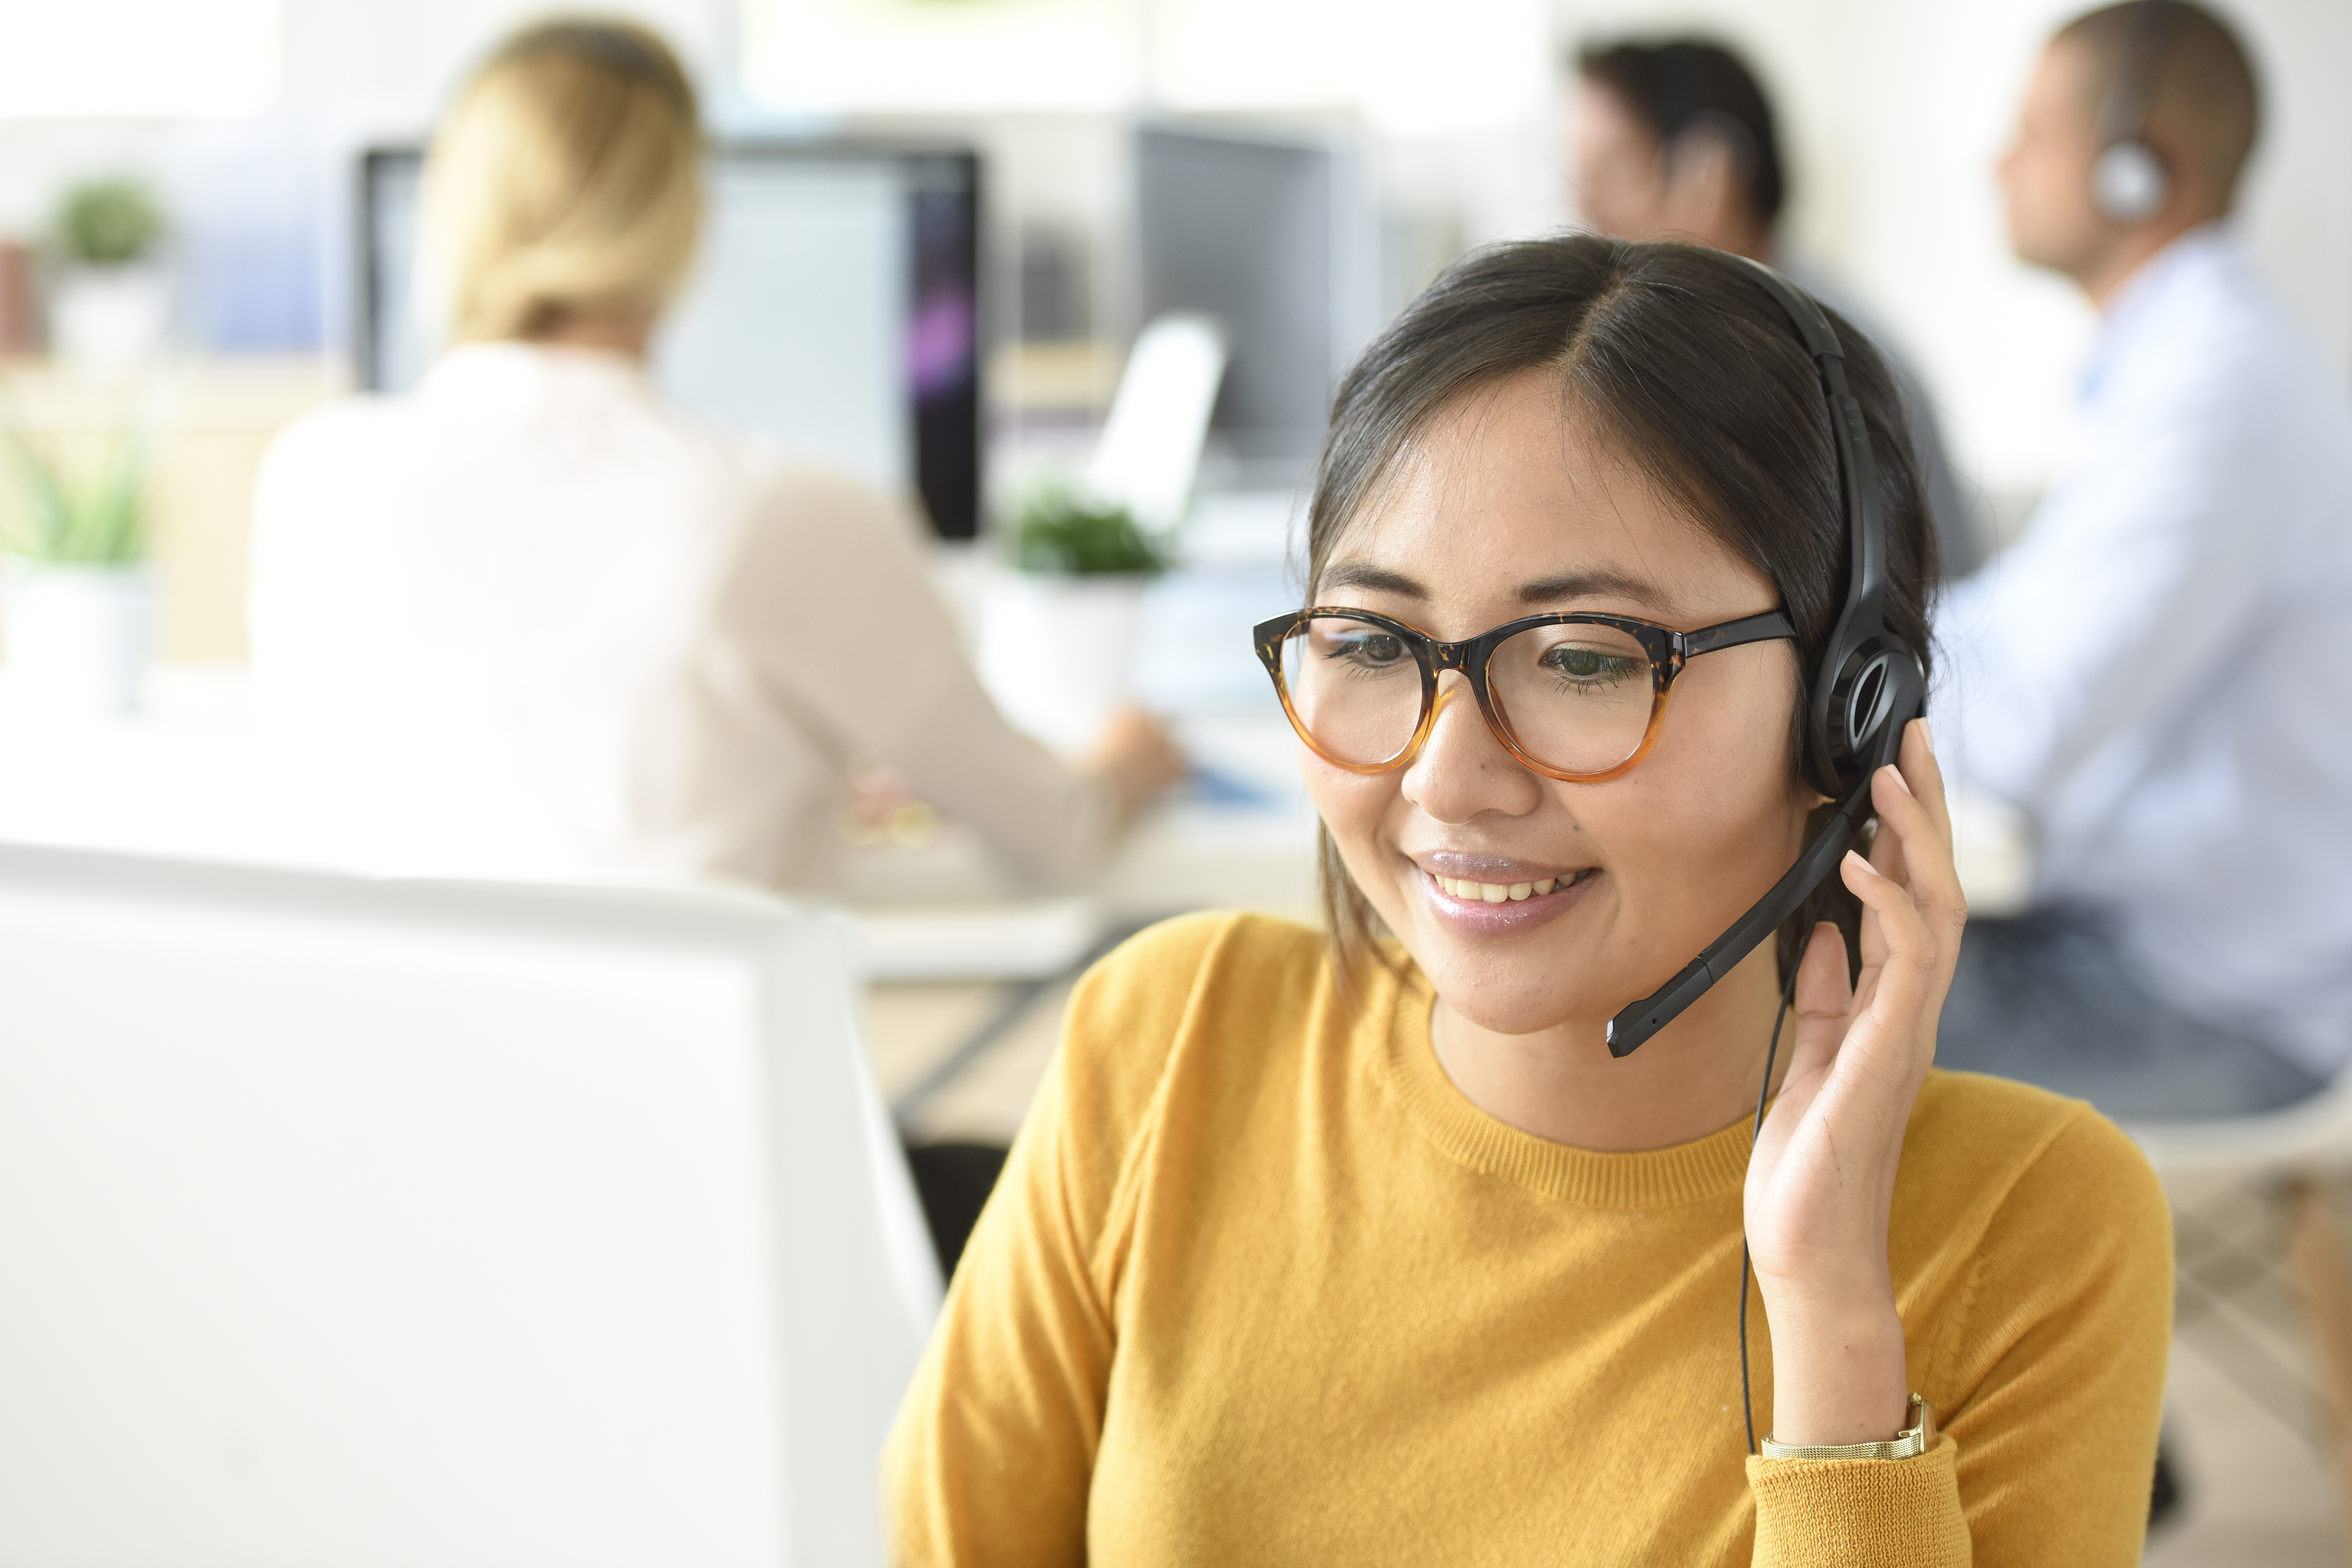 How Modern WFM Impacts the Contact Center Customer Experience